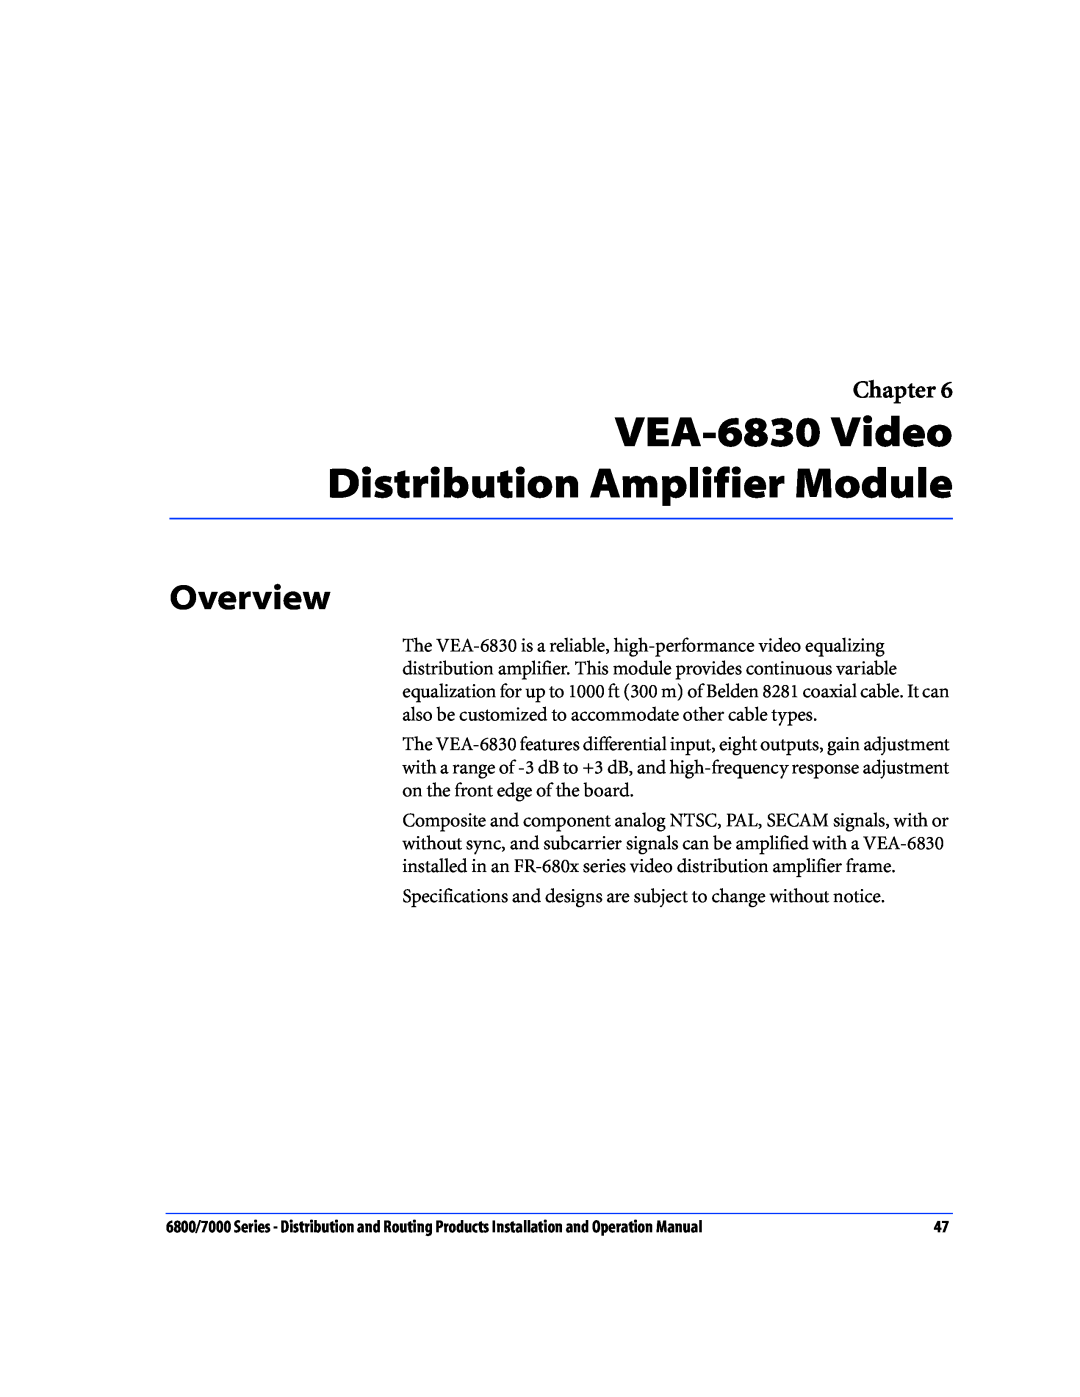 Nokia 6800 Series, 7000 Series operation manual VEA-6830 Video Distribution Amplifier Module, Overview, Chapter 